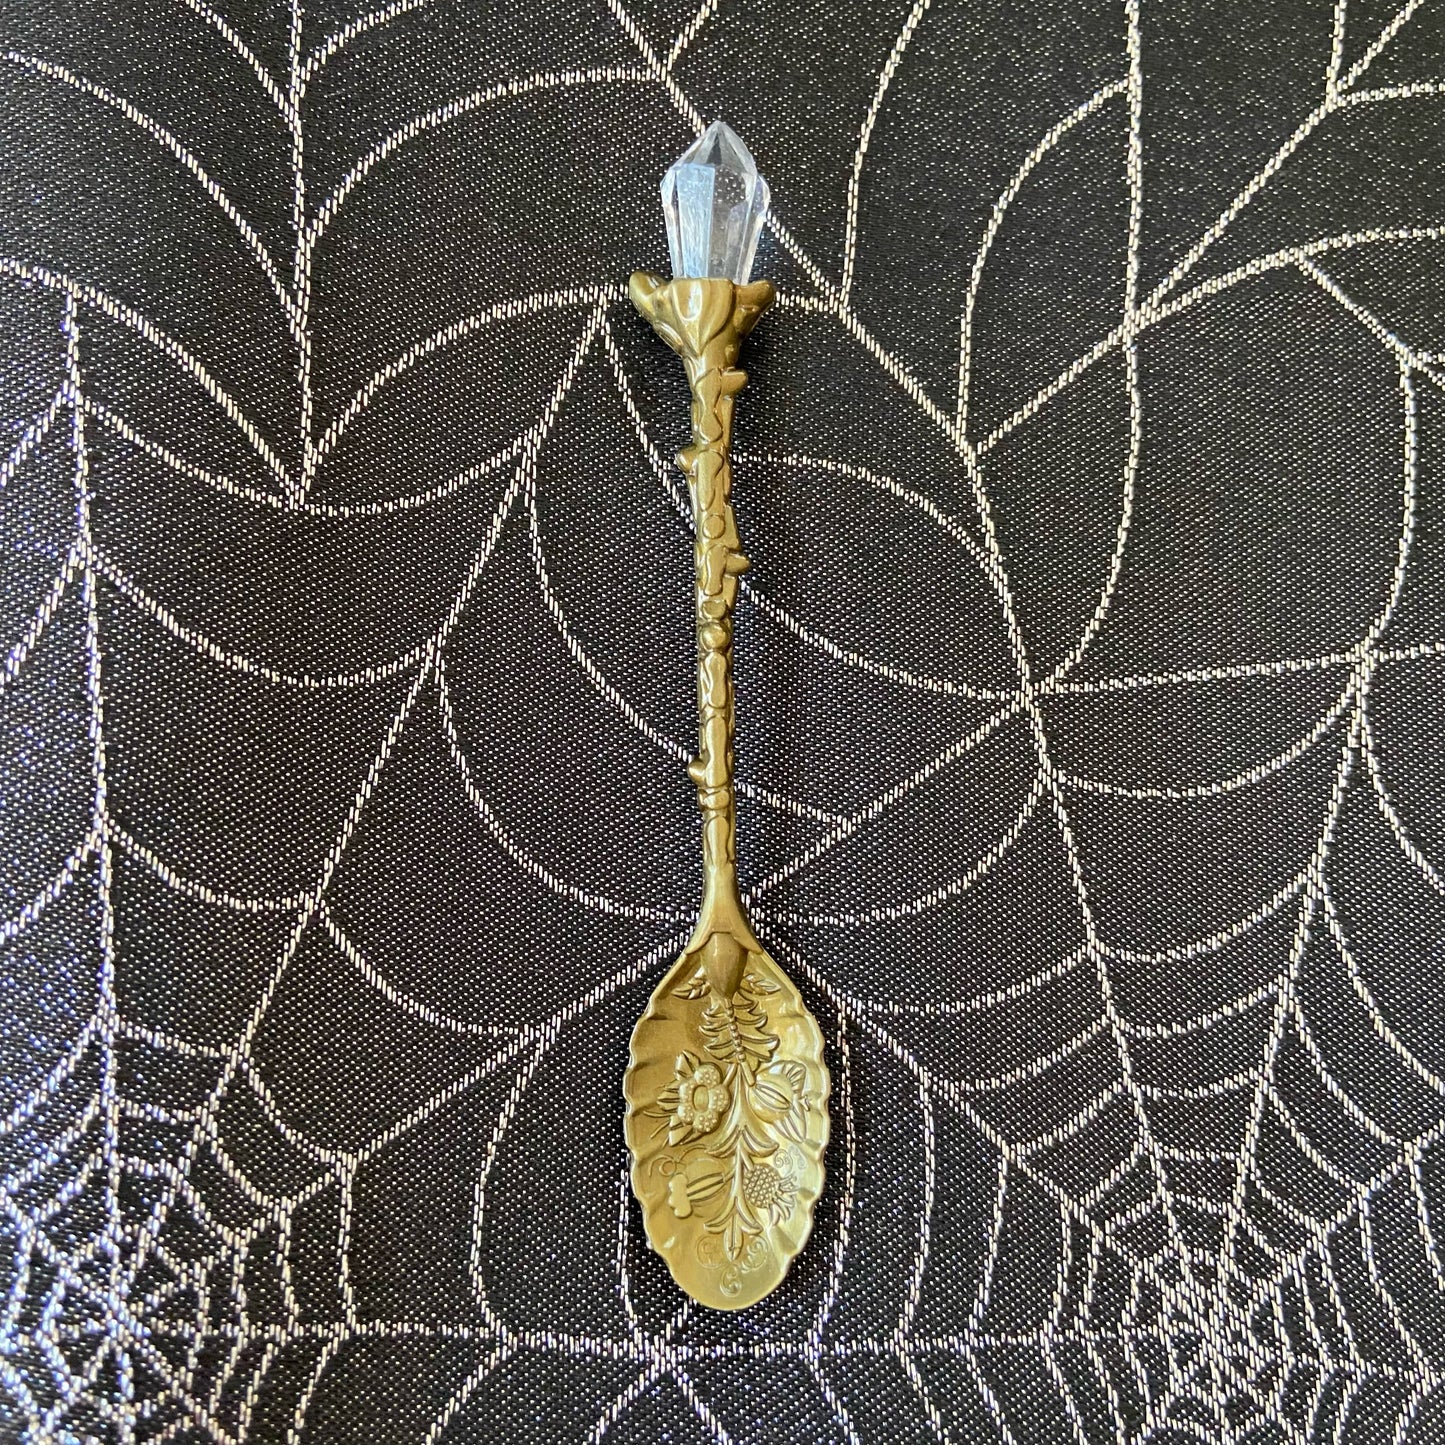 Witchy Herb Spoons